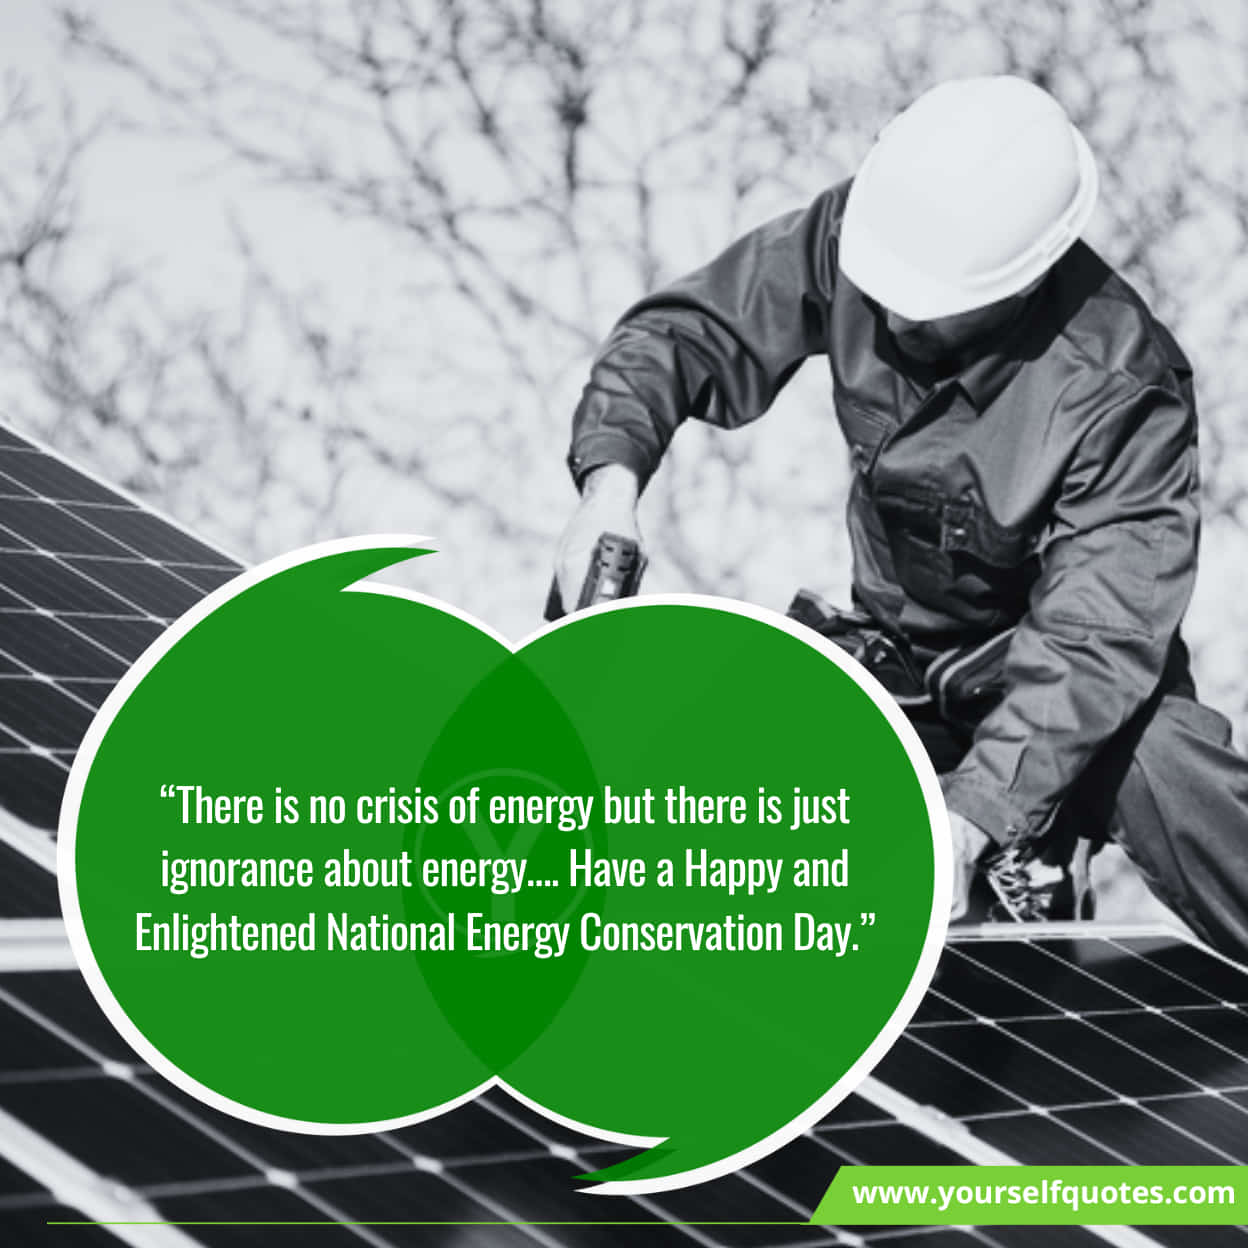 National Energy Conservation Day Wishes